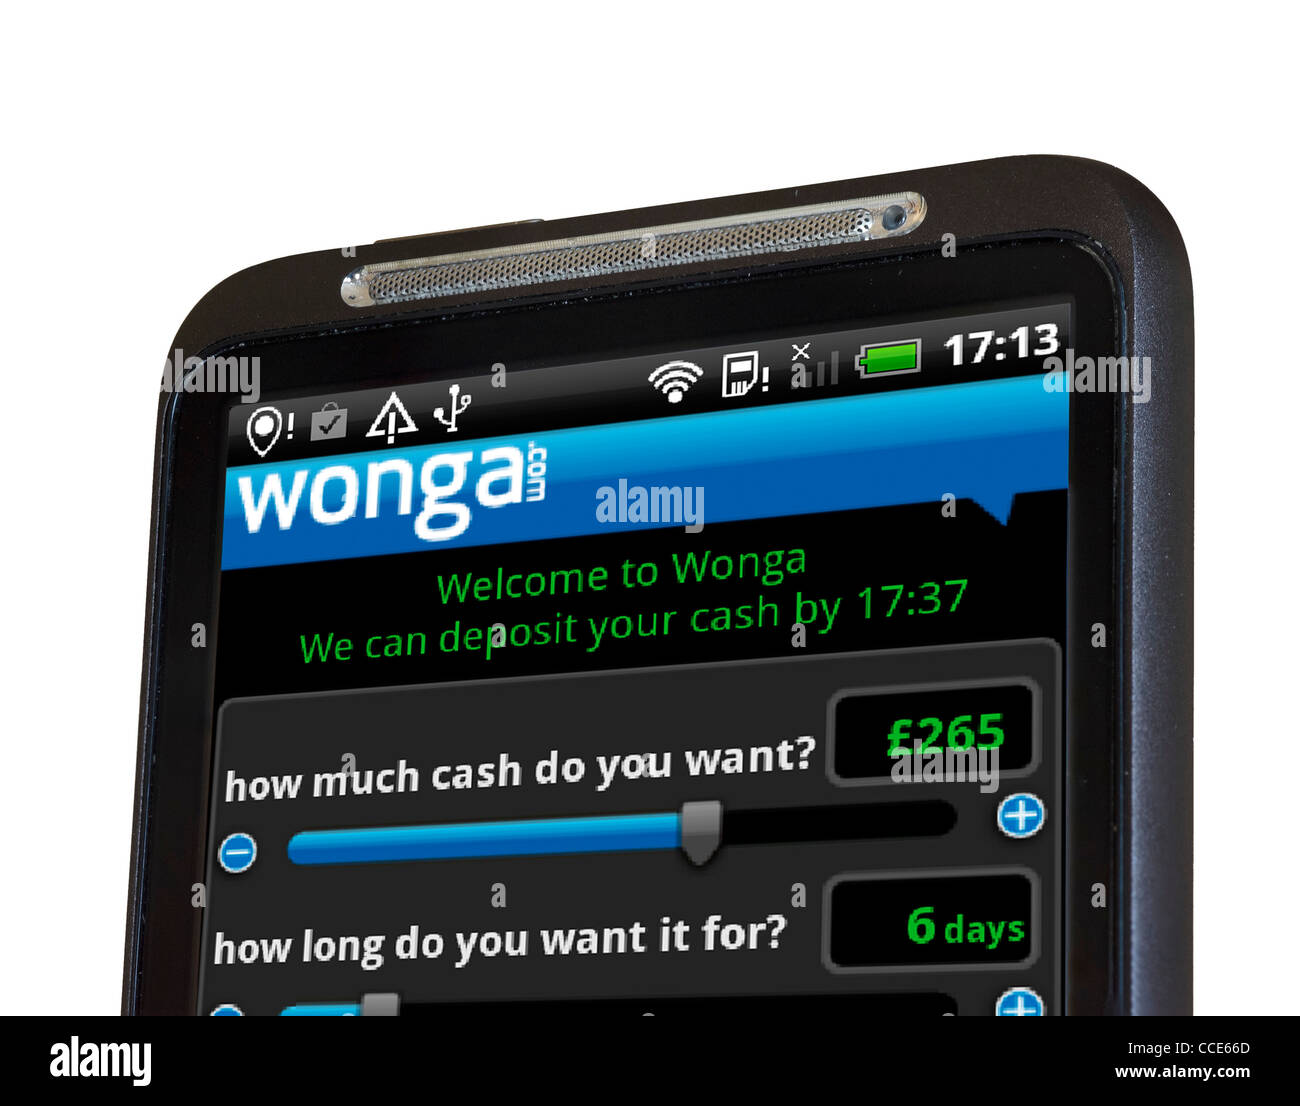 The android app of the UK based payday loan company, Wonga, on an HTC smartphone Stock Photo